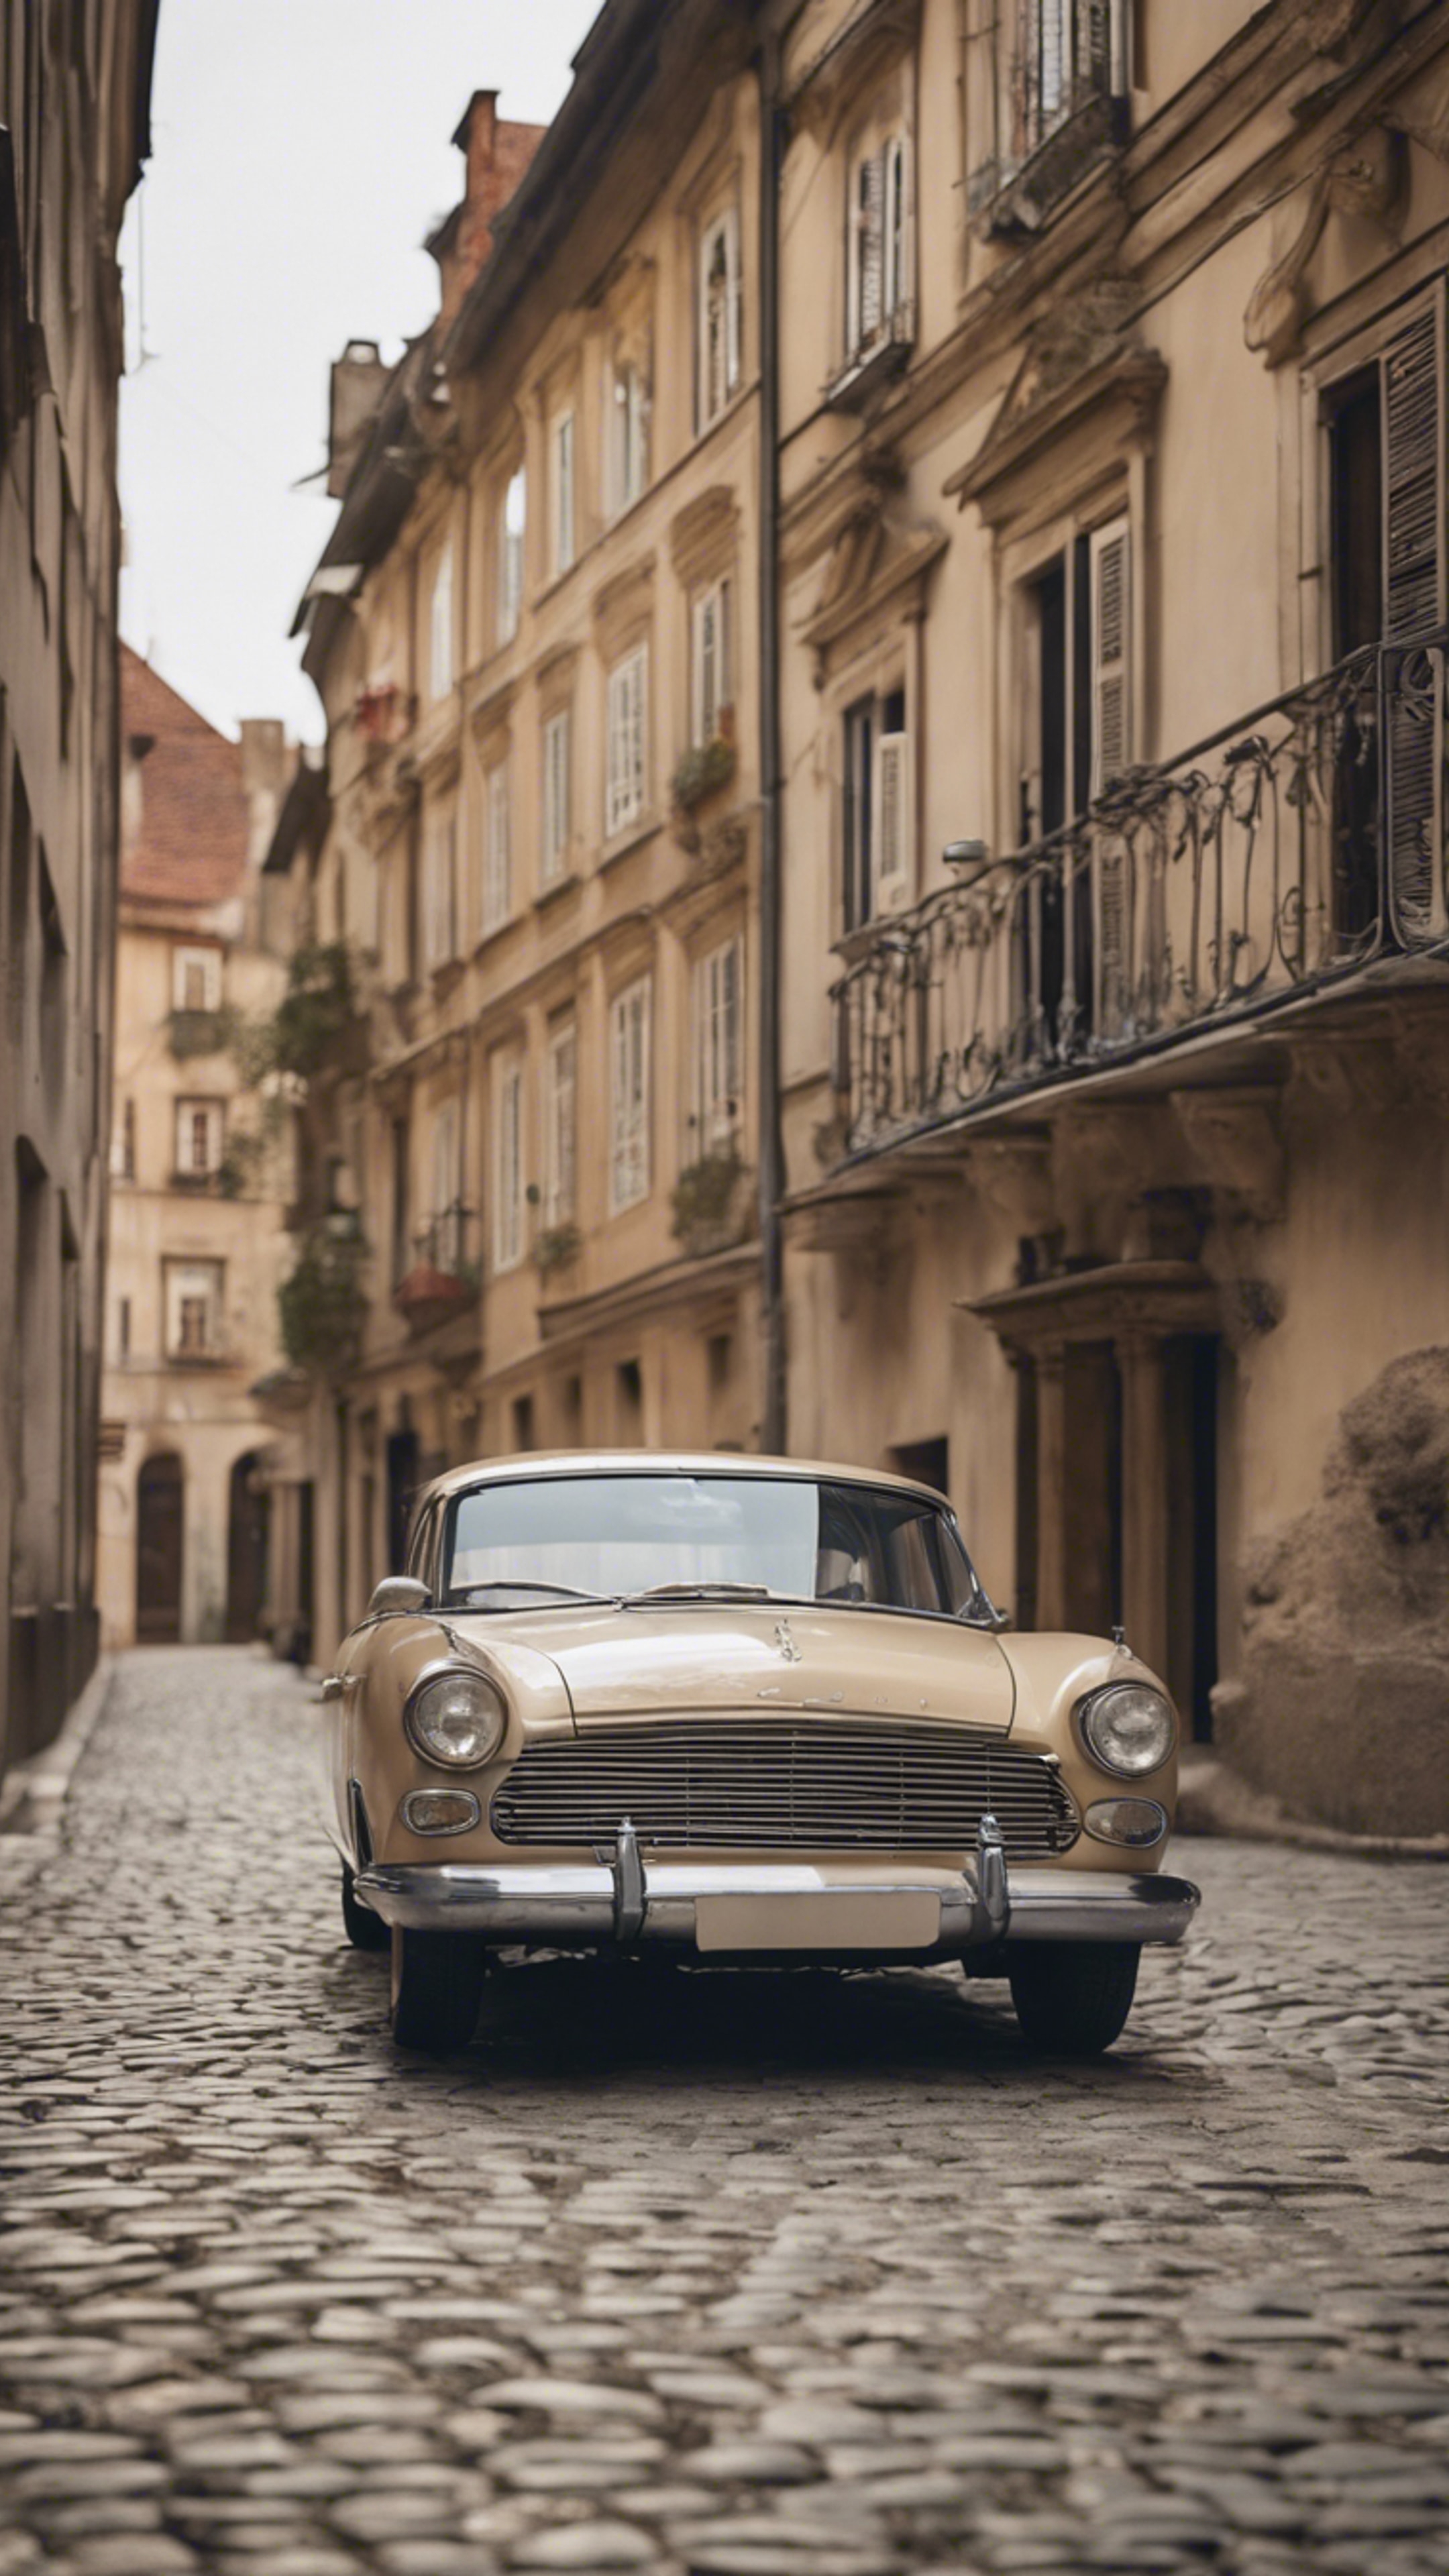 A beige classic car parked on a cobblestone street with rustic buildings in the background. ورق الجدران[31a873a8b96b4be69c6a]